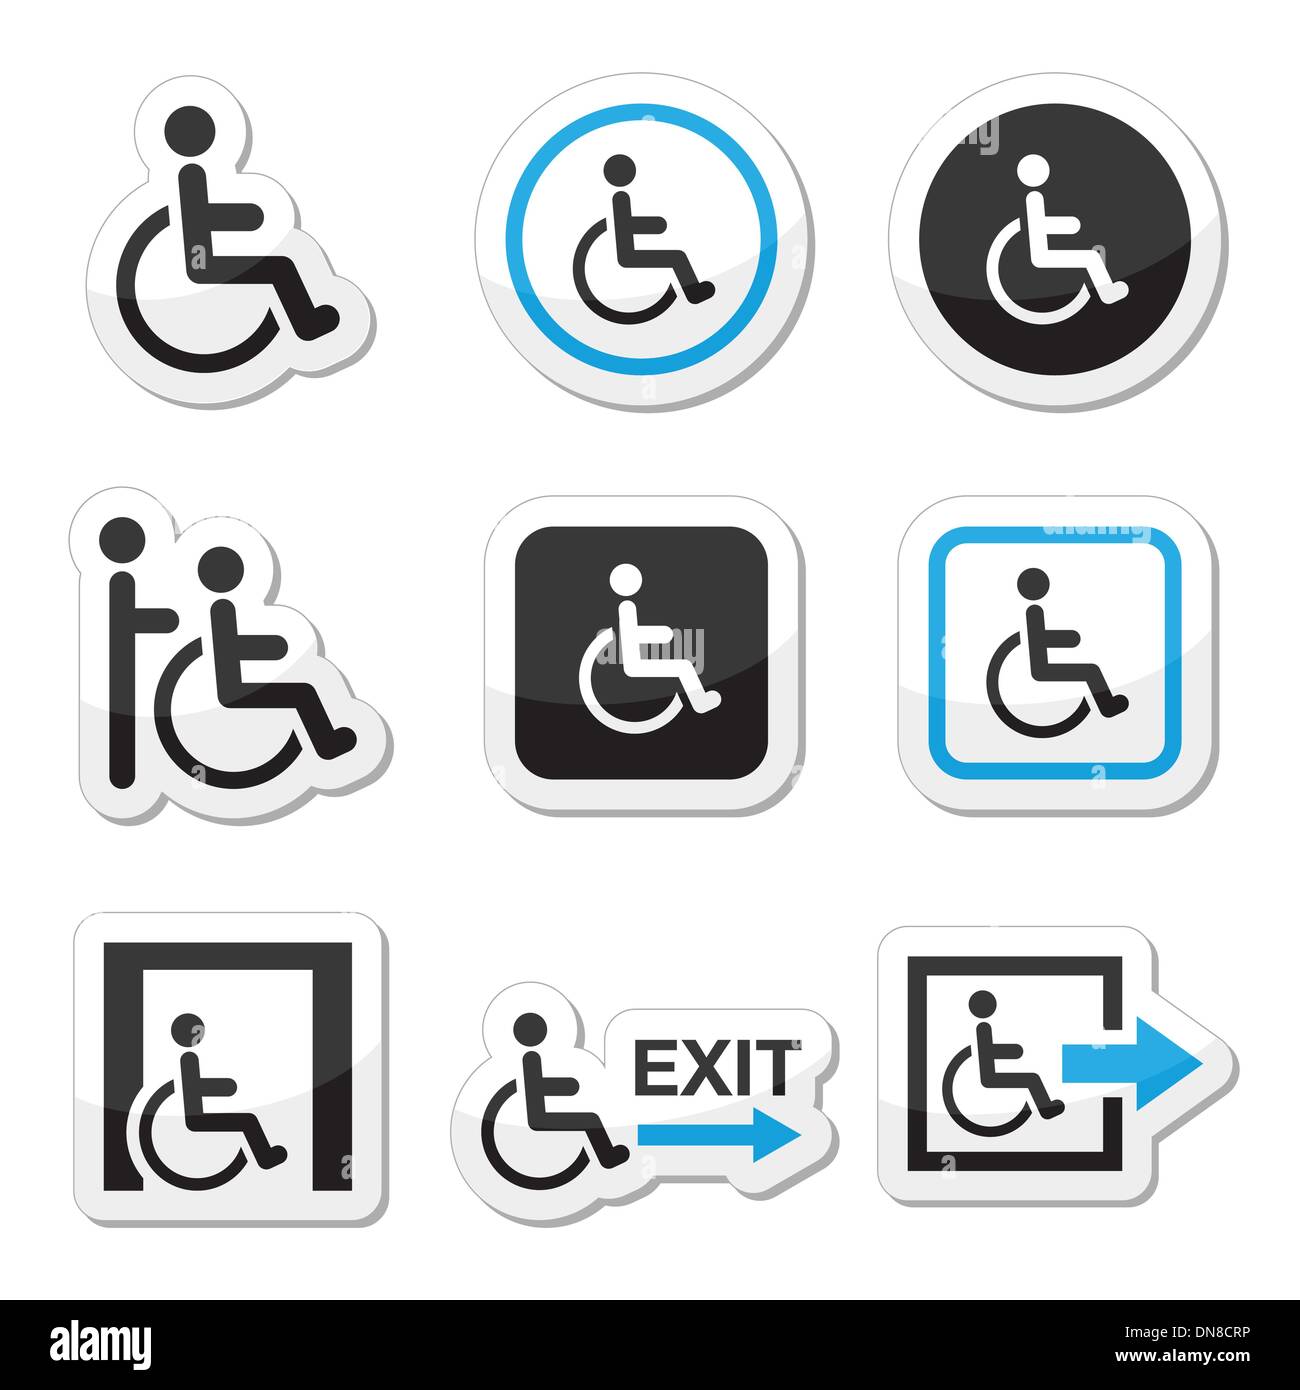 Man on wheelchair, disabled, emergency exit icons set Stock Vector